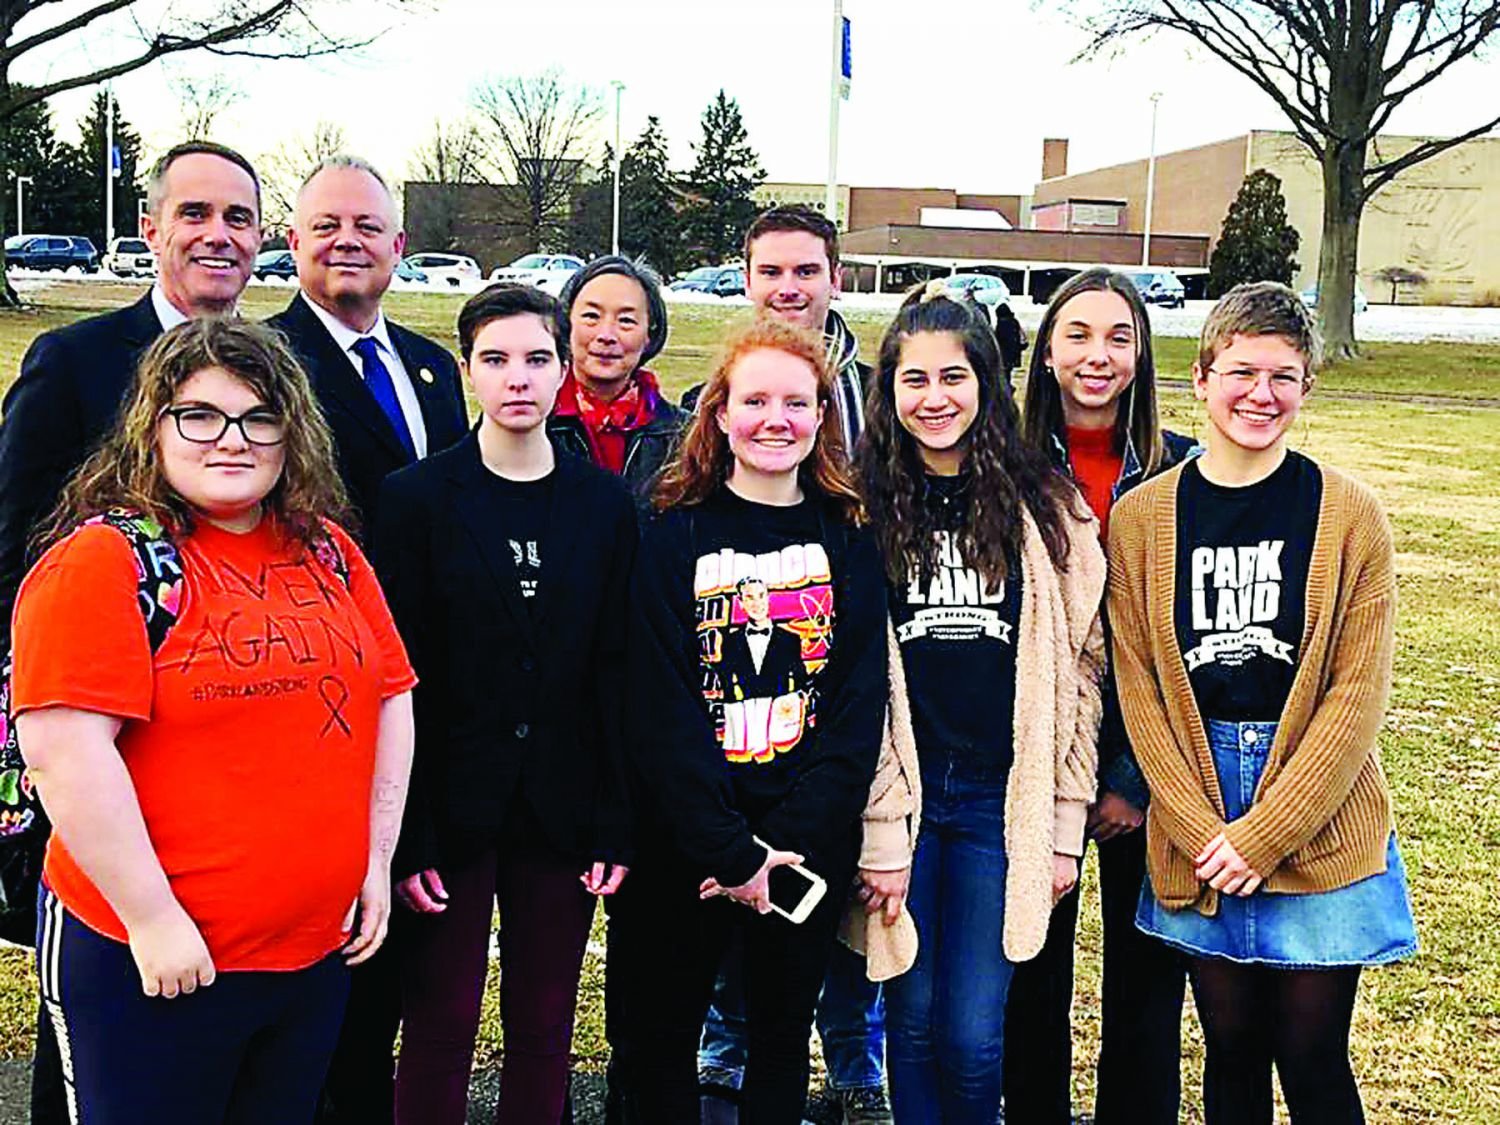 Students gathered with legislators (back row) Steve Santarsiero, Perry Warren and former House member Helen Tai, at Council Rock High School North on the anniversary of the Parkland High School shooting.